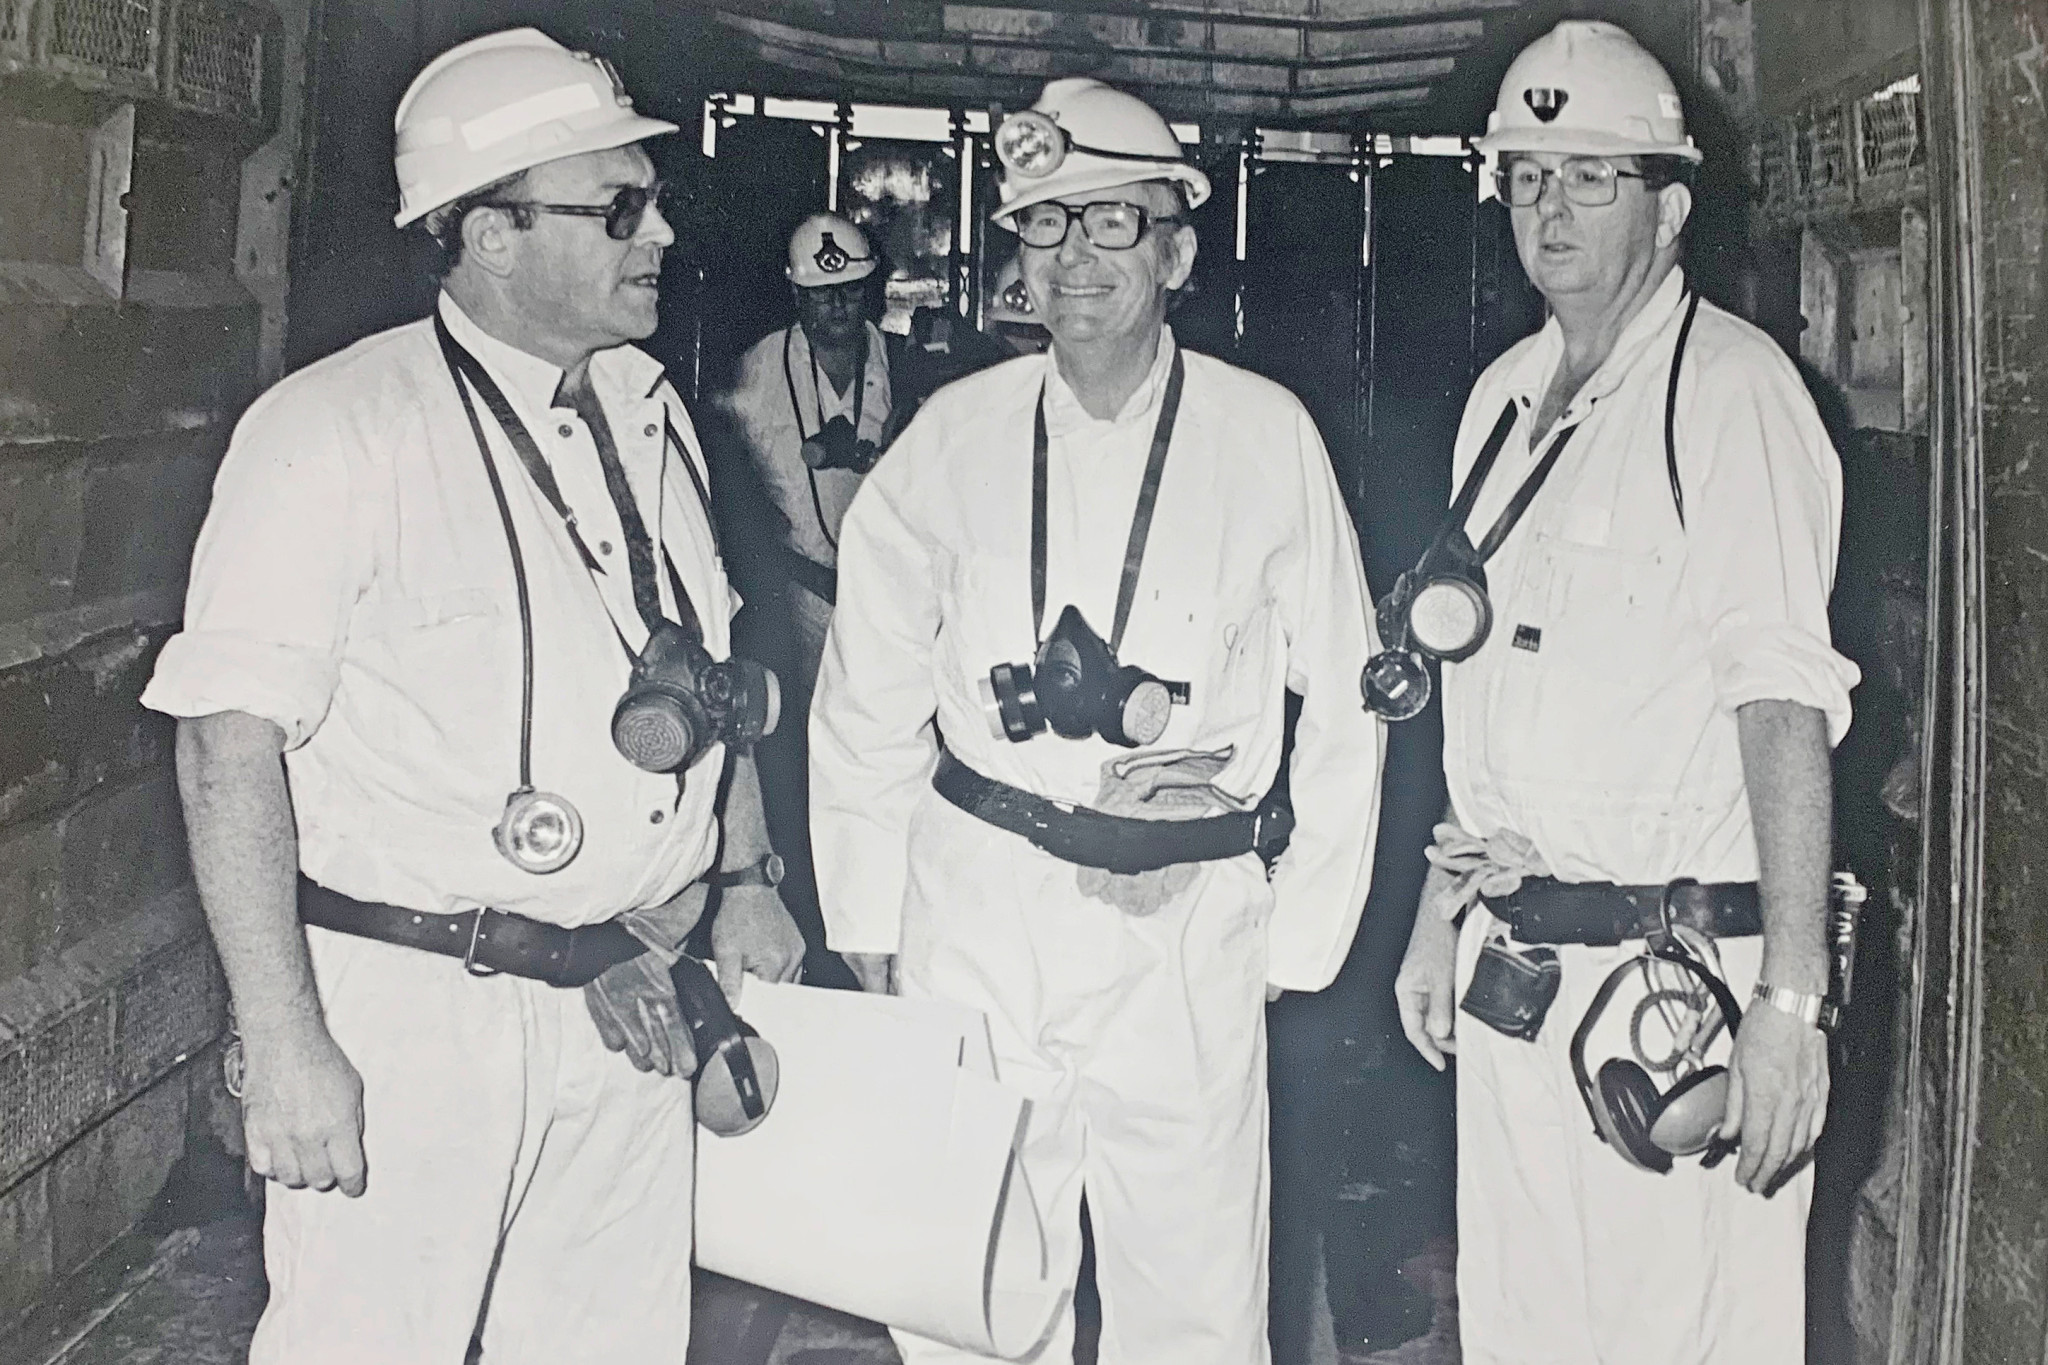 Barry Sullivan (centre) with the President of Ireland, Dr Patrick Hillery, and then Mount Isa Mines boss Tony White, preparing to go underground.